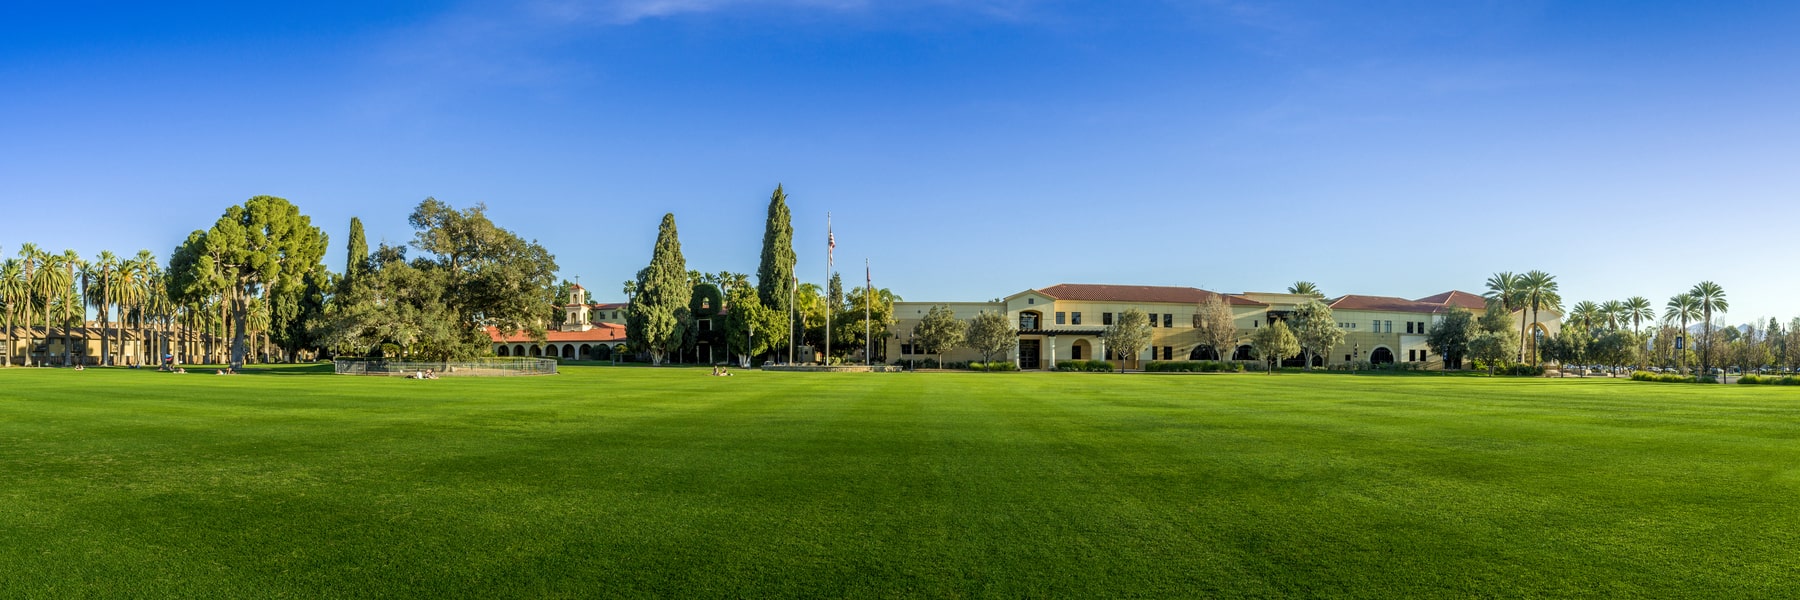 Front lawn of the CBU campus